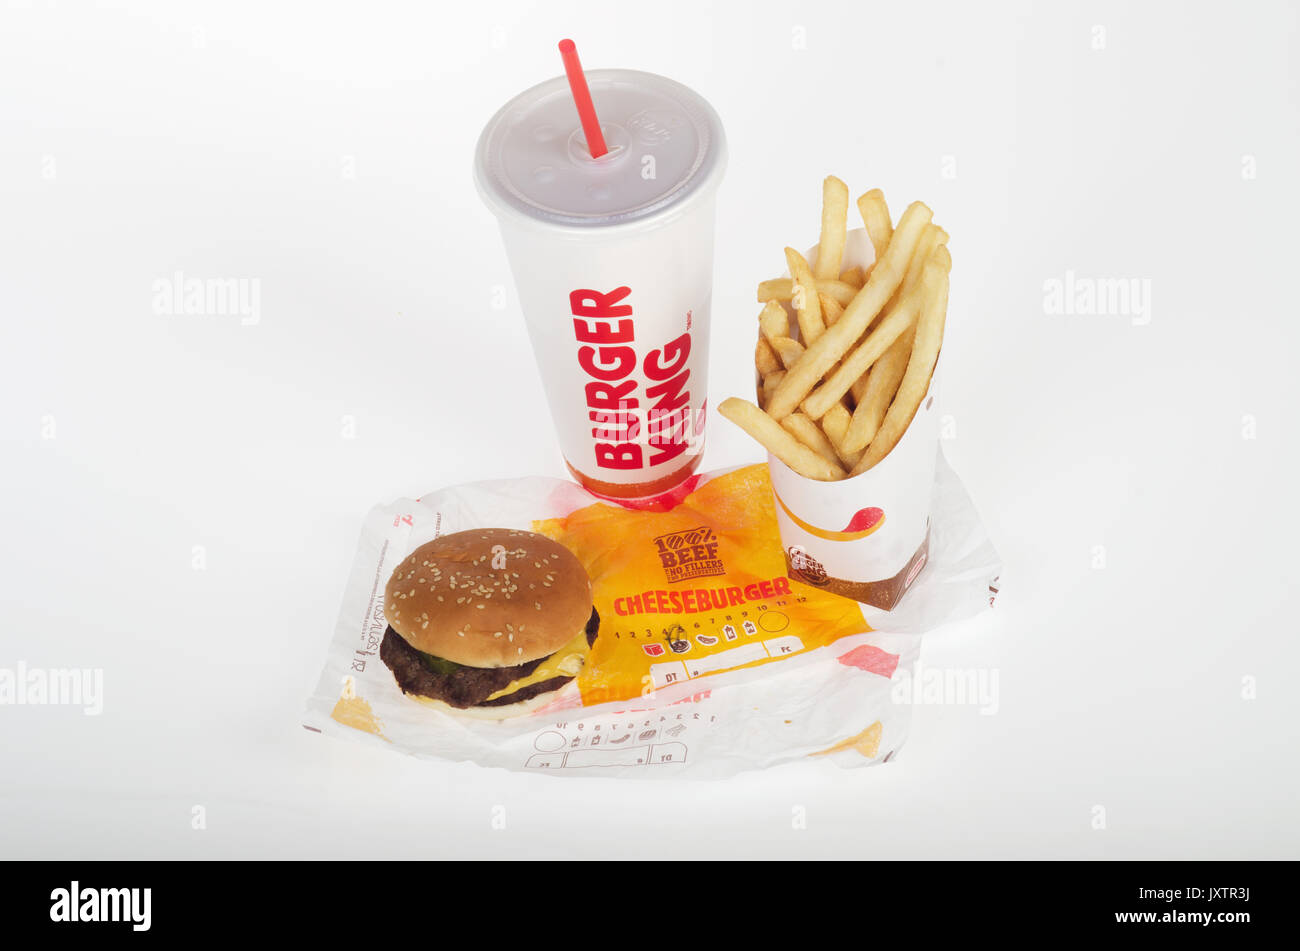 Burger King double cheeseburger with large french fries and drink with straw on wrapper. USA Stock Photo